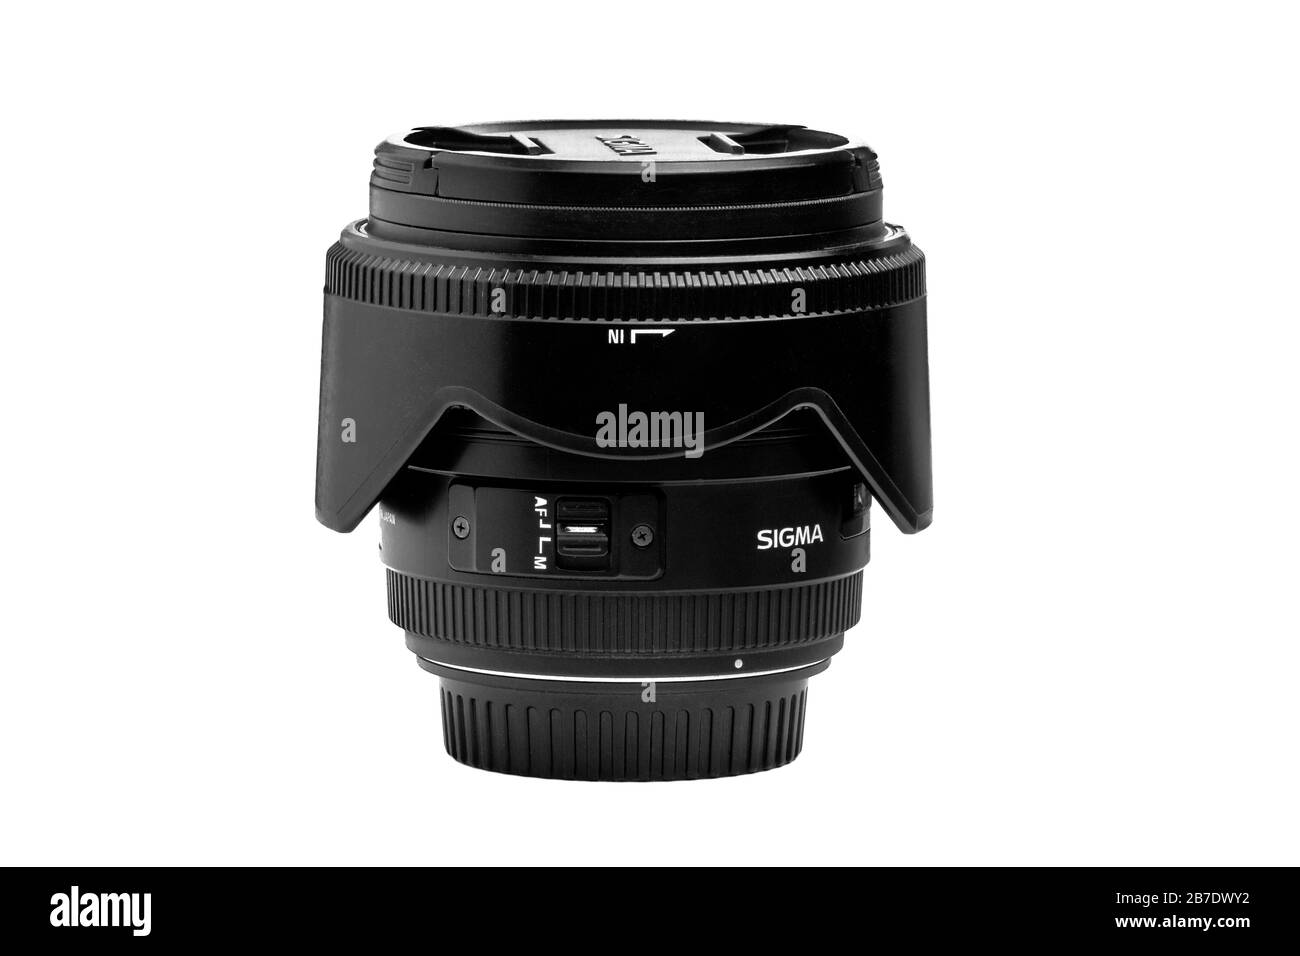 image of a sigma lens with a lens hood for the camera on a white background Stock Photo